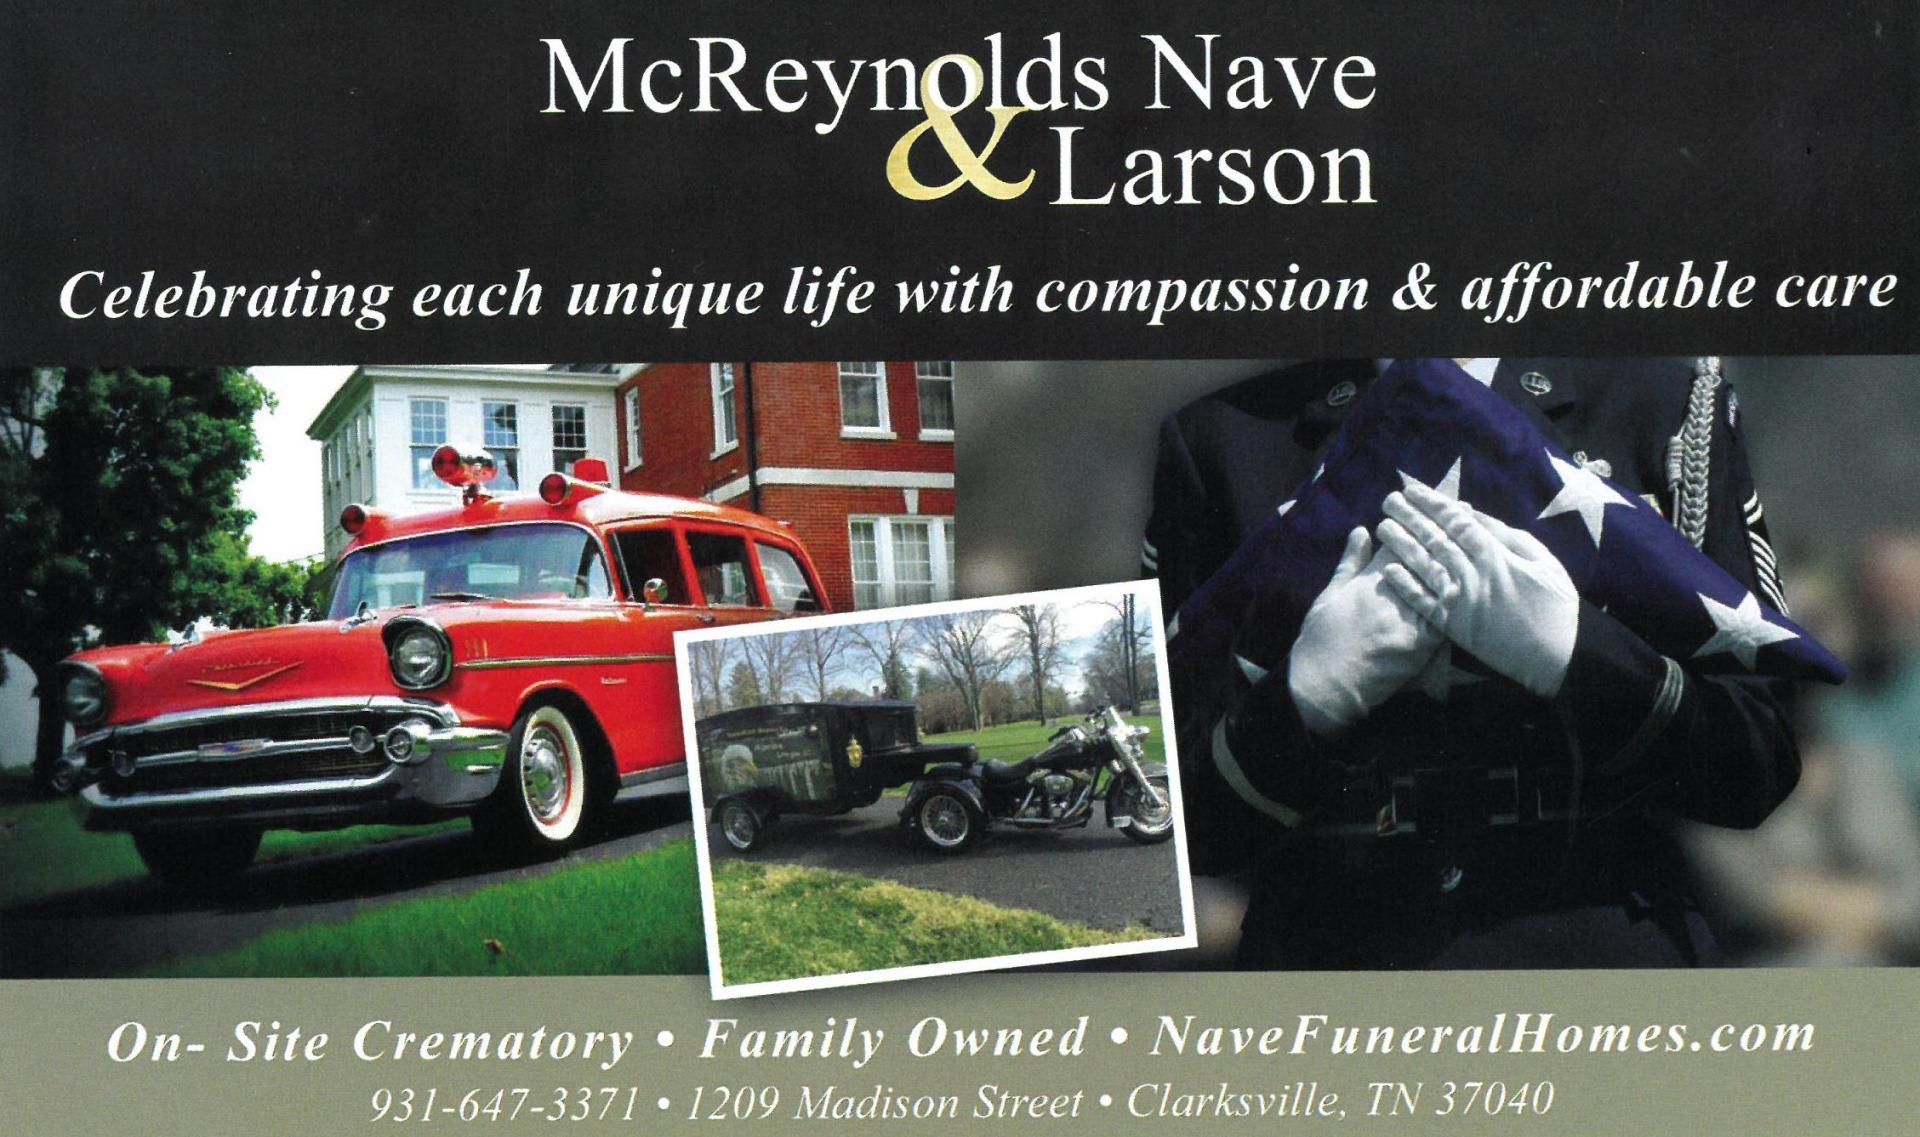 Advertisement for McReynolds-Nave & Larson Funeral Home